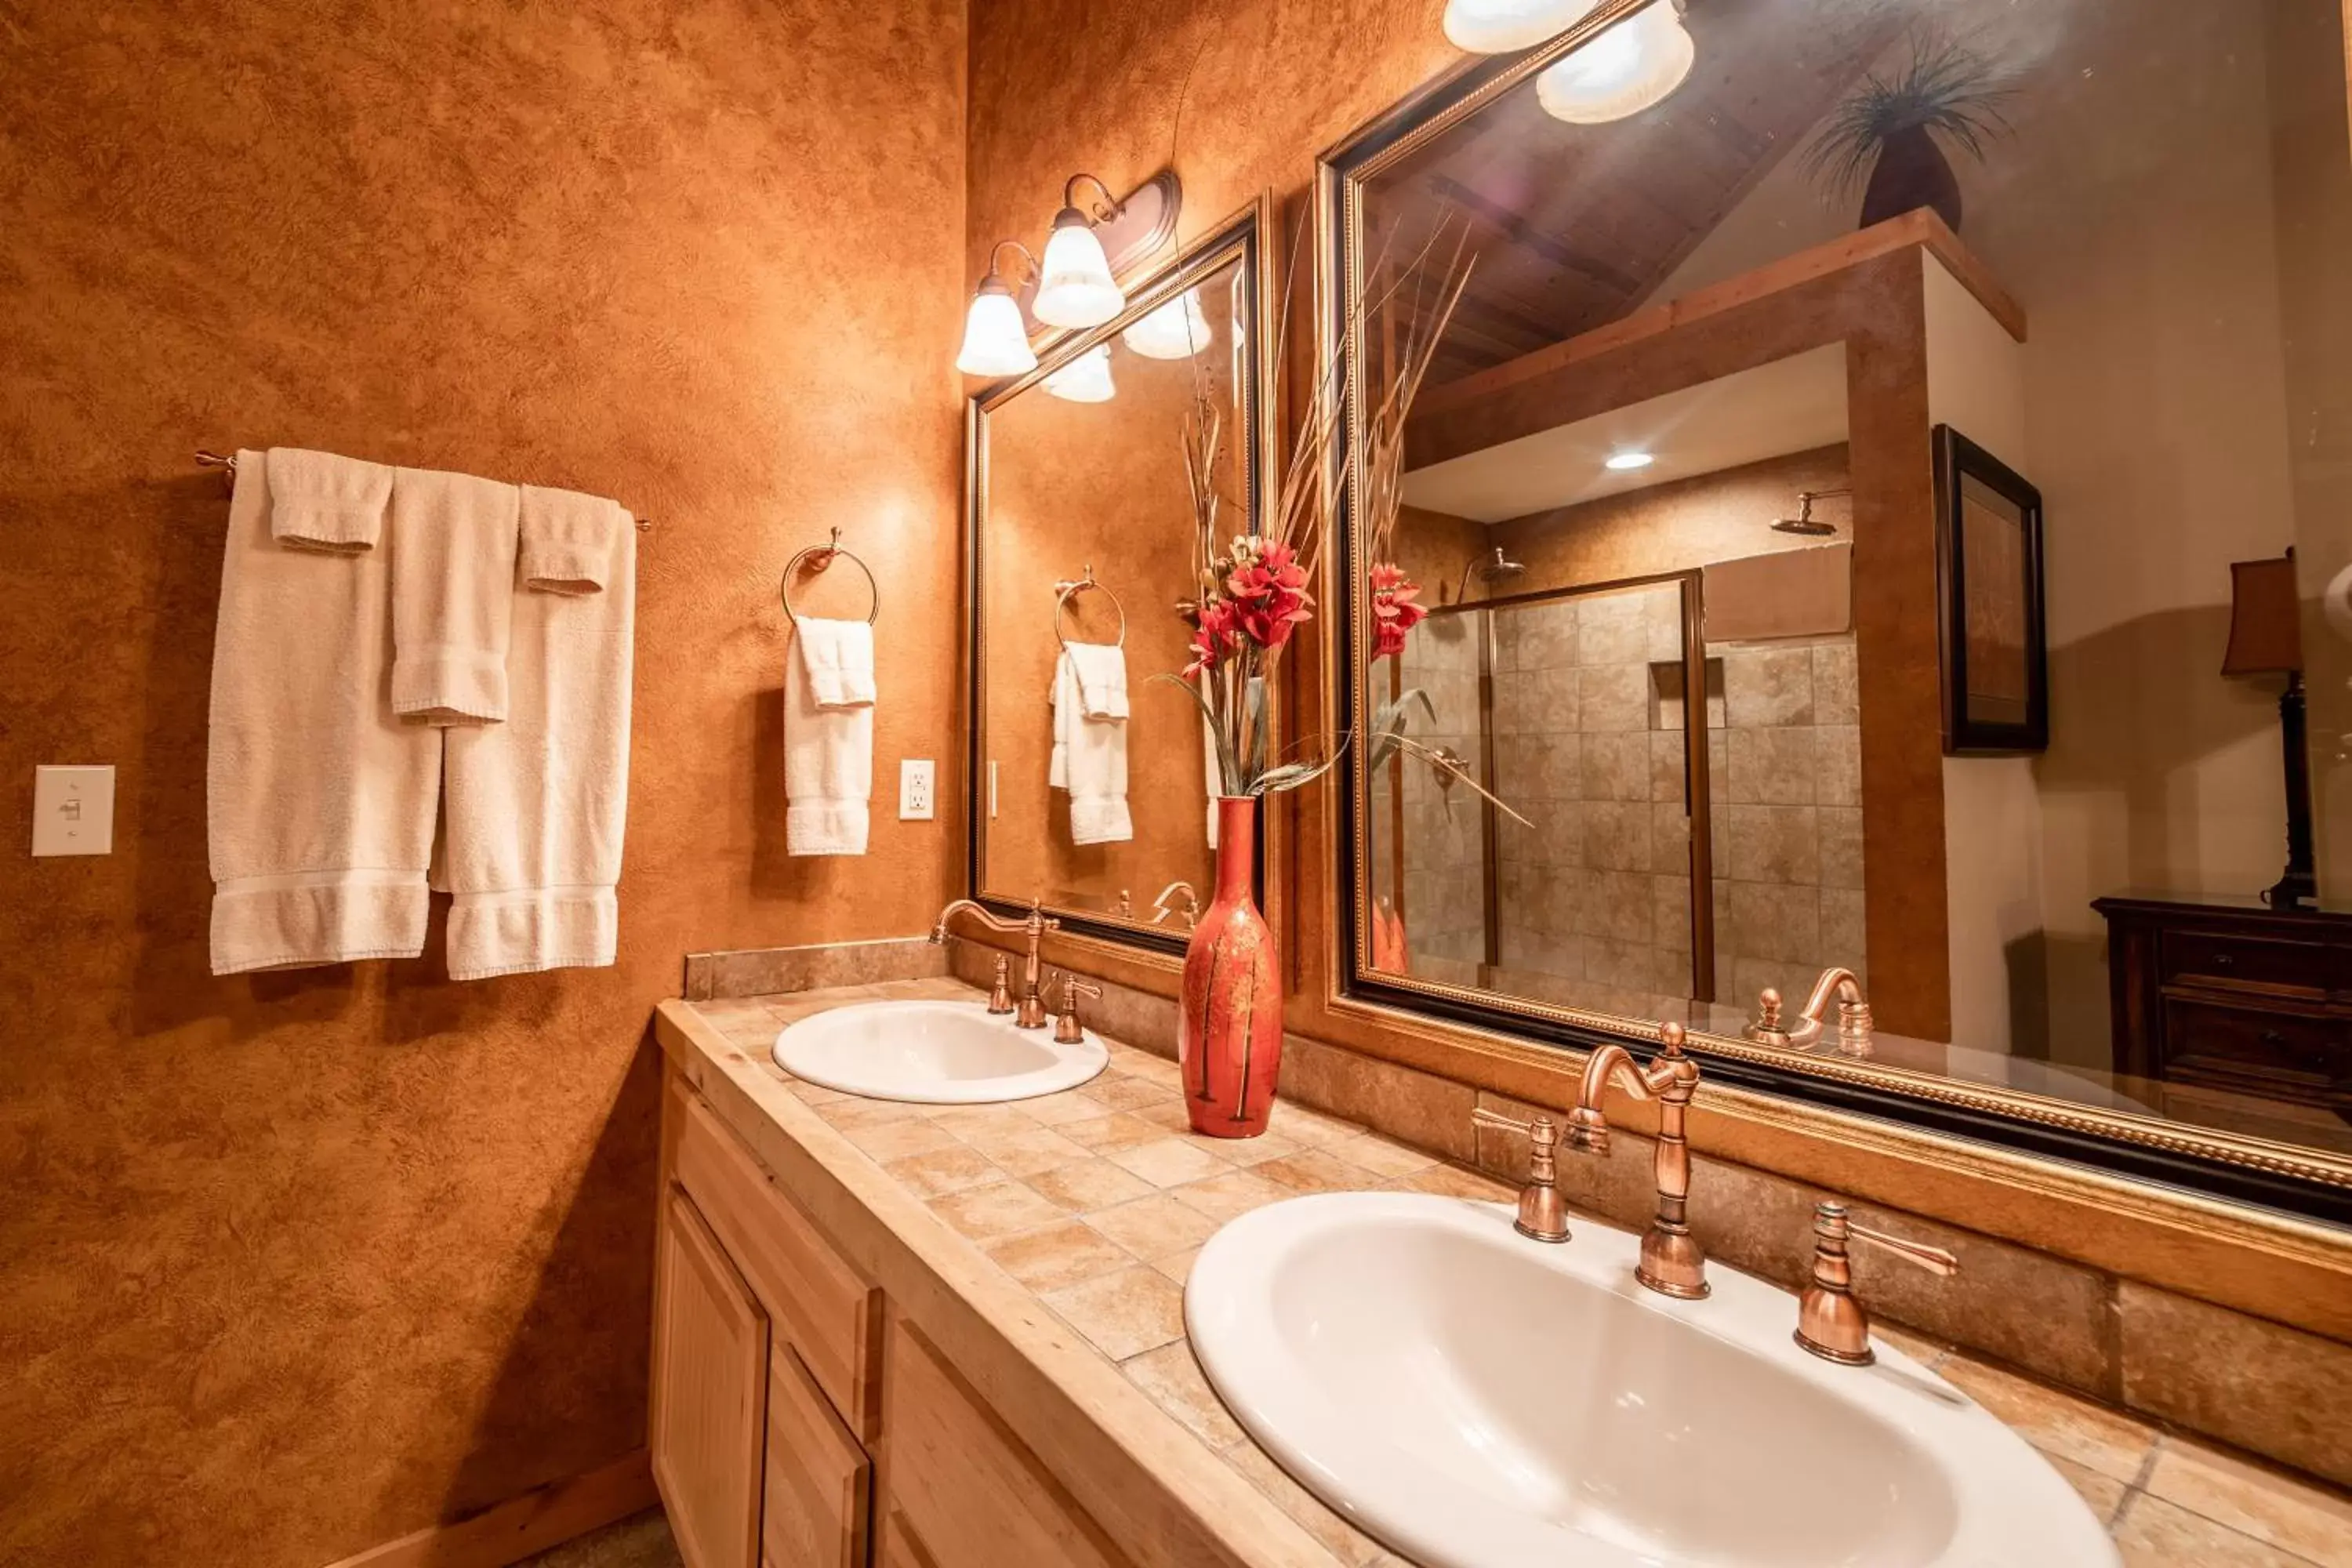 Bathroom in Cabins at Grand Mountain